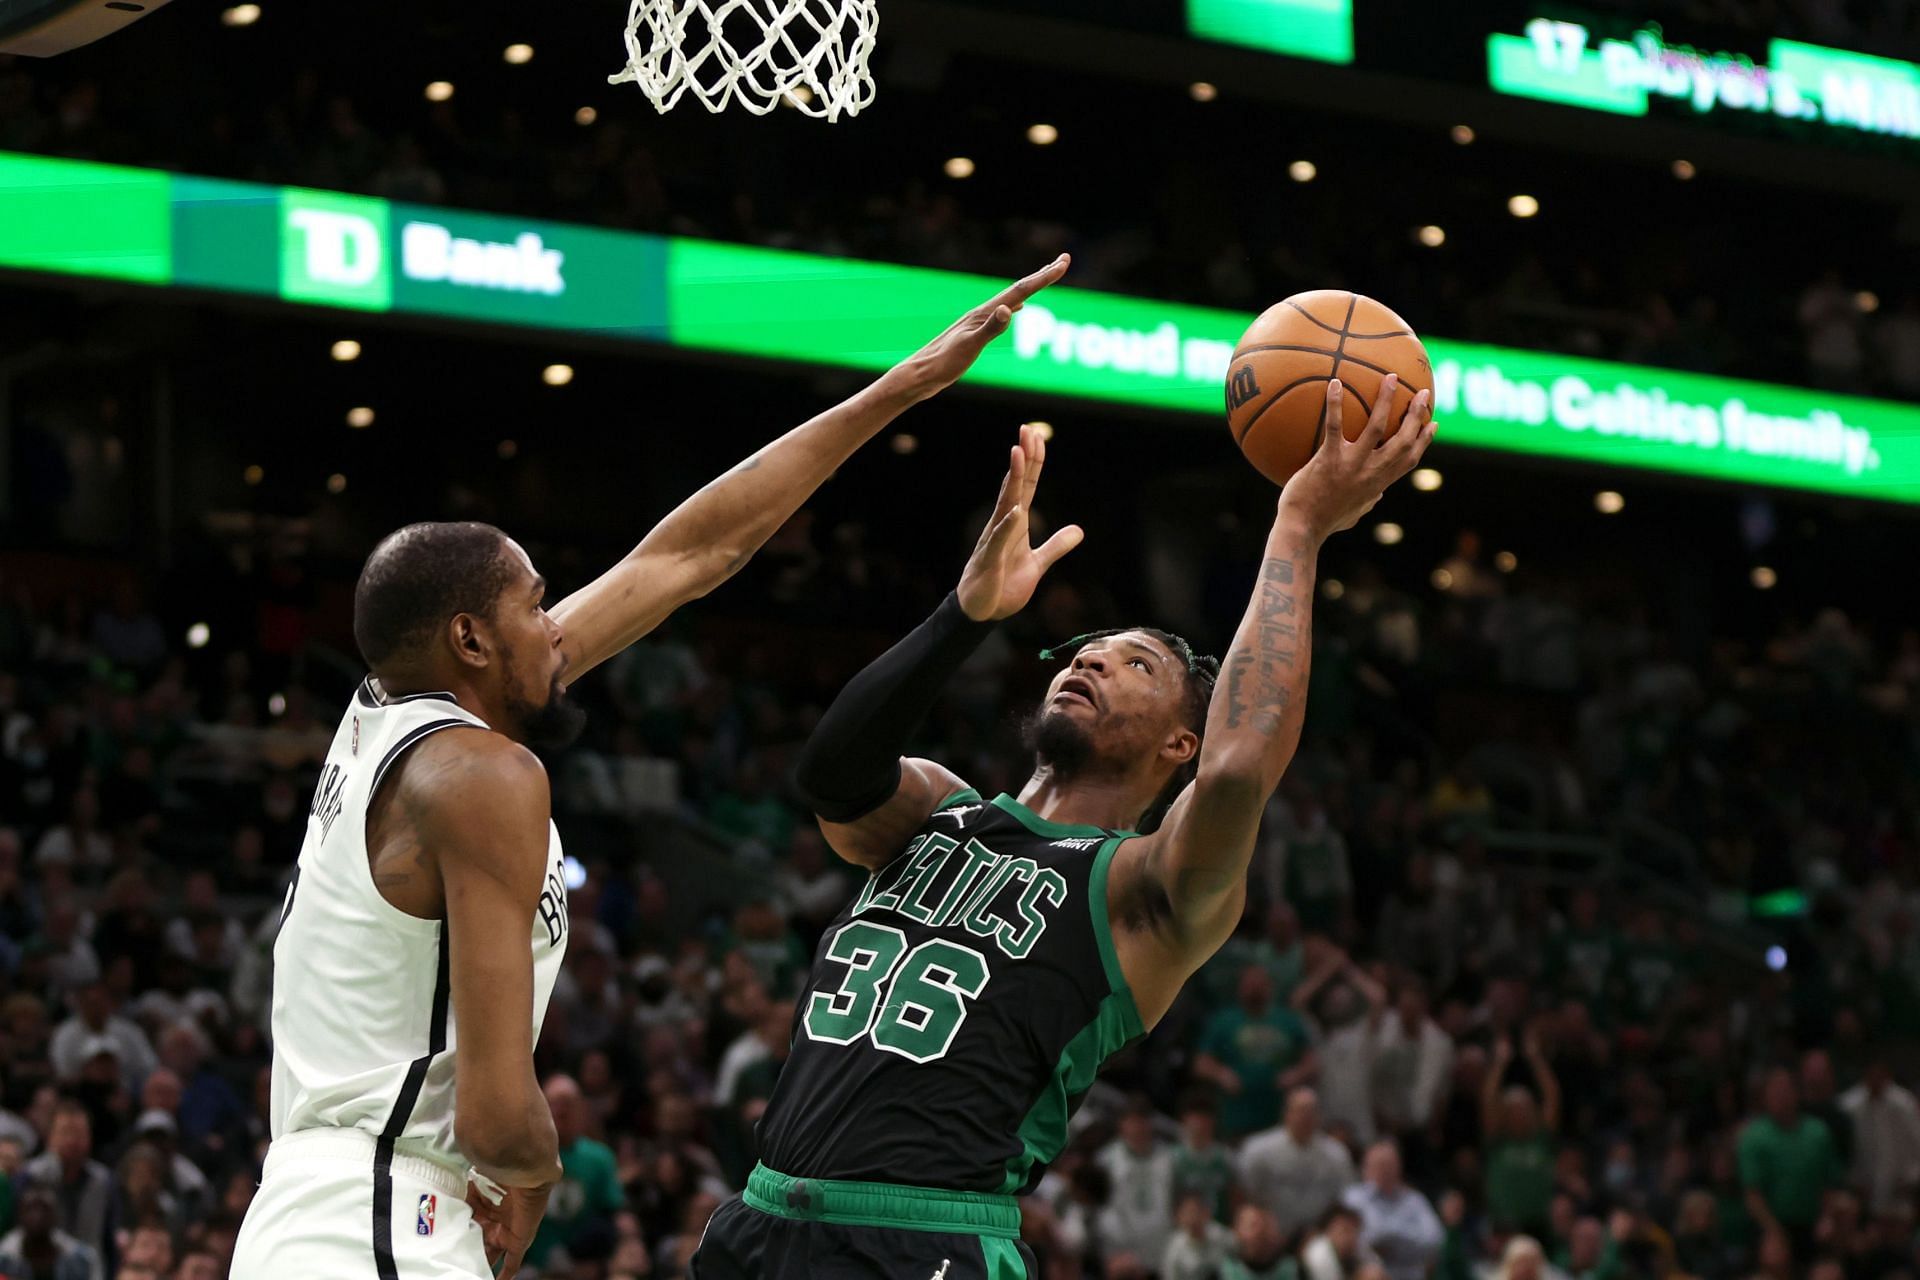 Kevin Durant of the Brooklyn Nets guards Marcus Smart of the Boston Celtics.